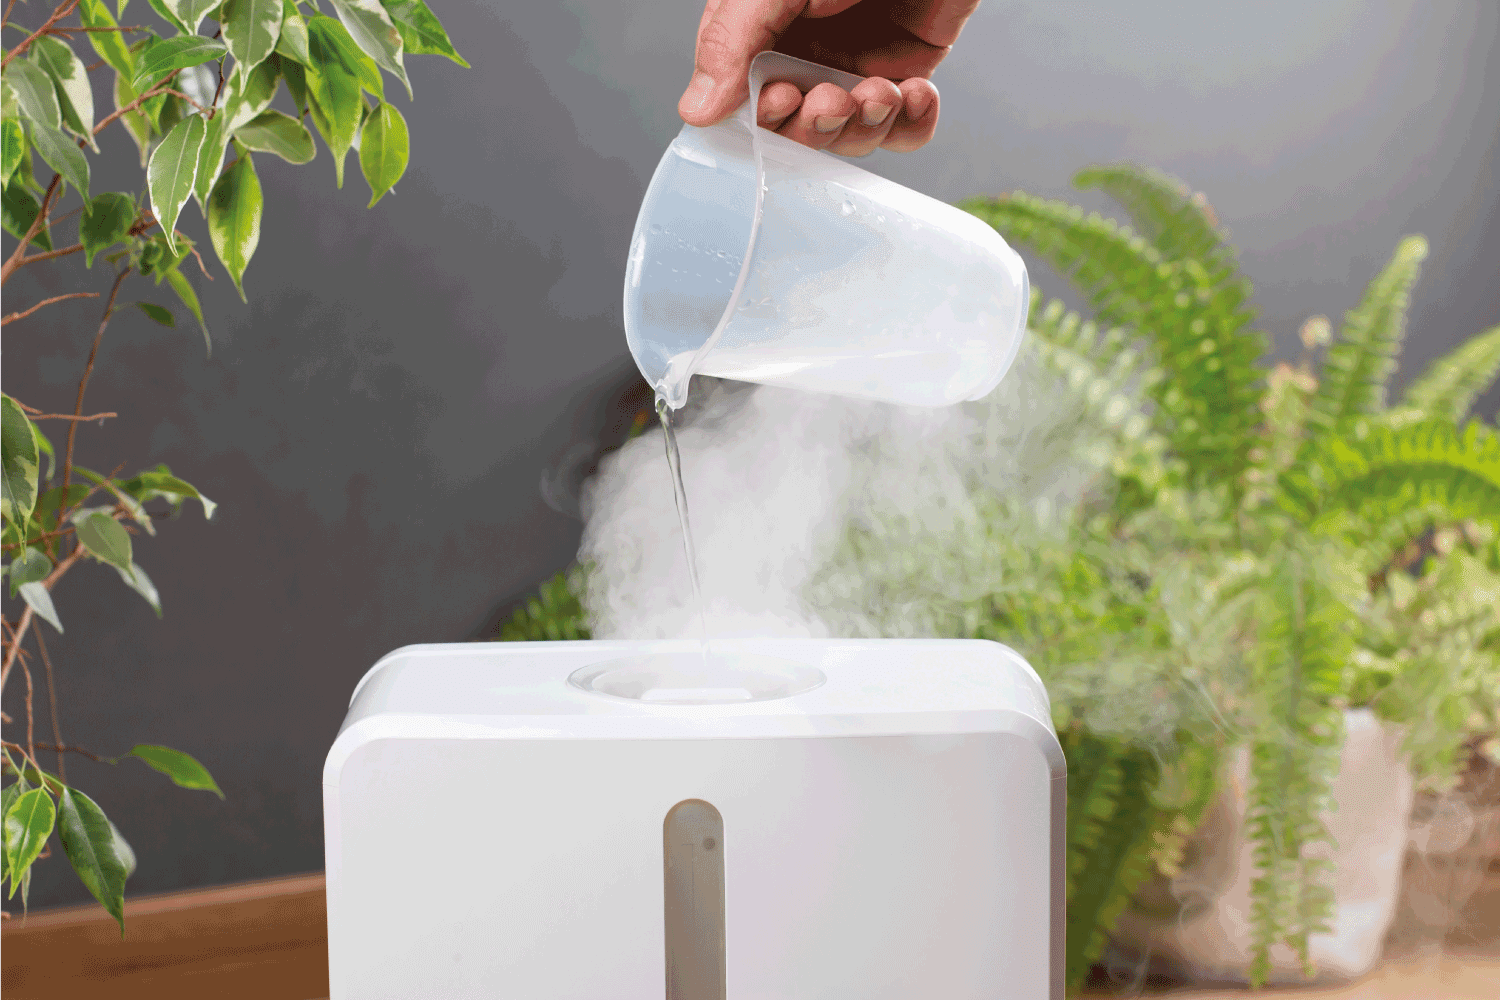 A man uses a humidifier at home. Filling the reservoir with water